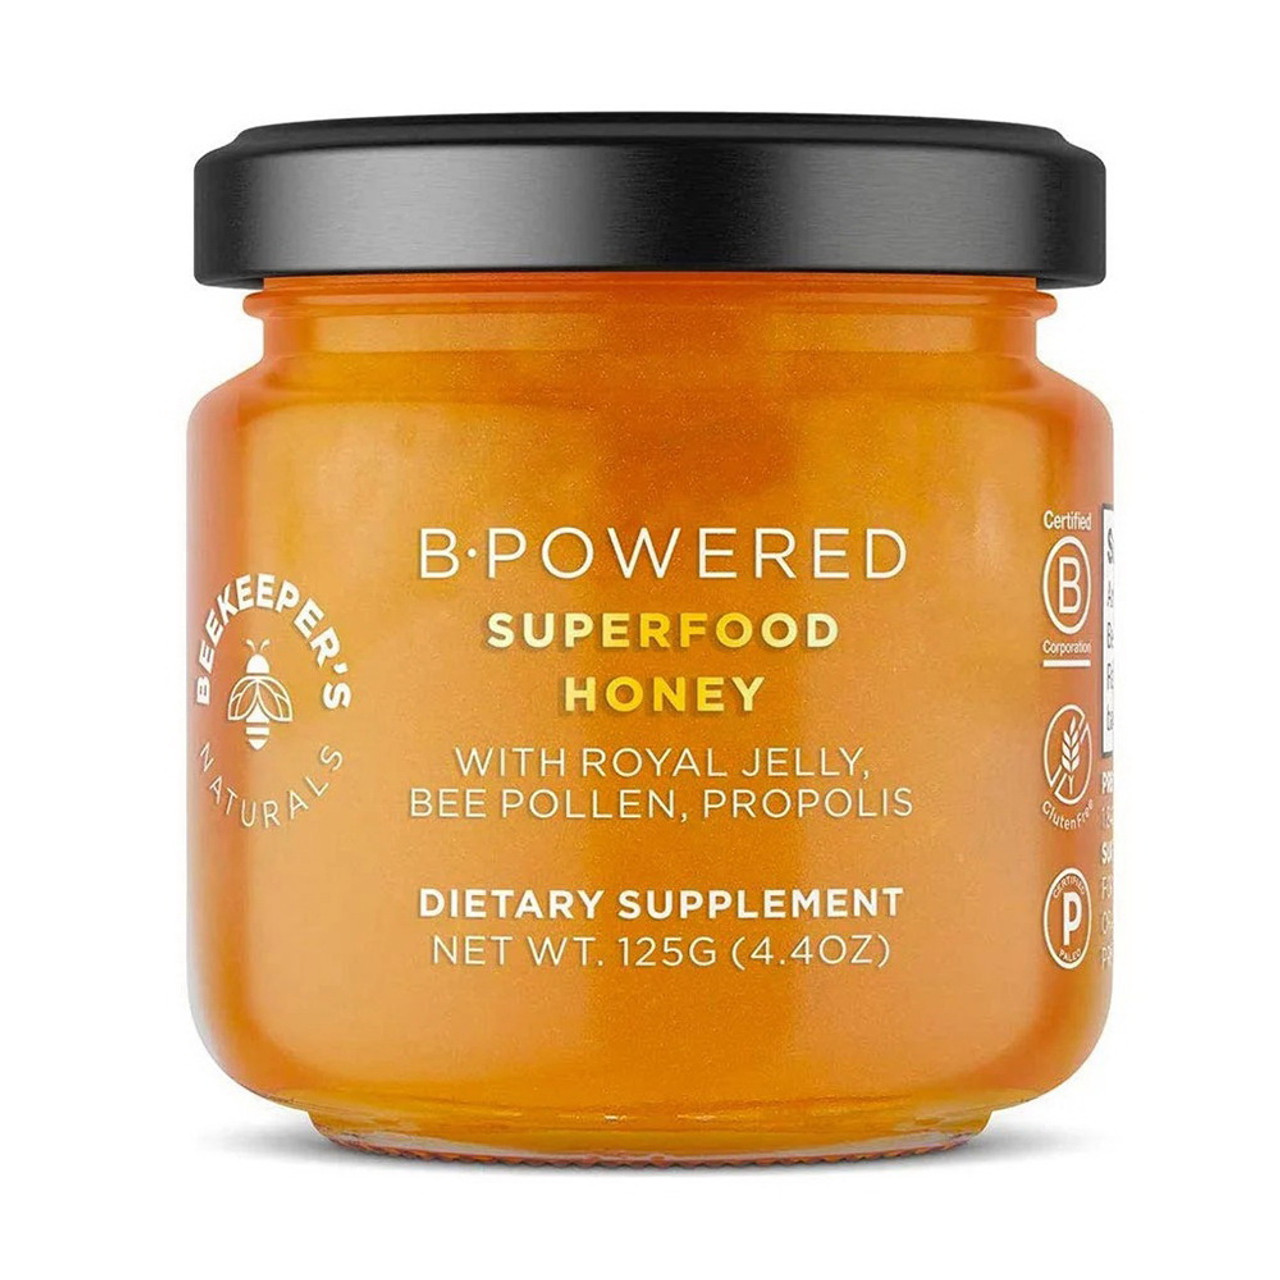 Beekeeper's Naturals B. Powered Superfood with Honey Propolis, Royal Jelly,  & Bee Pollen, 11.6 oz 